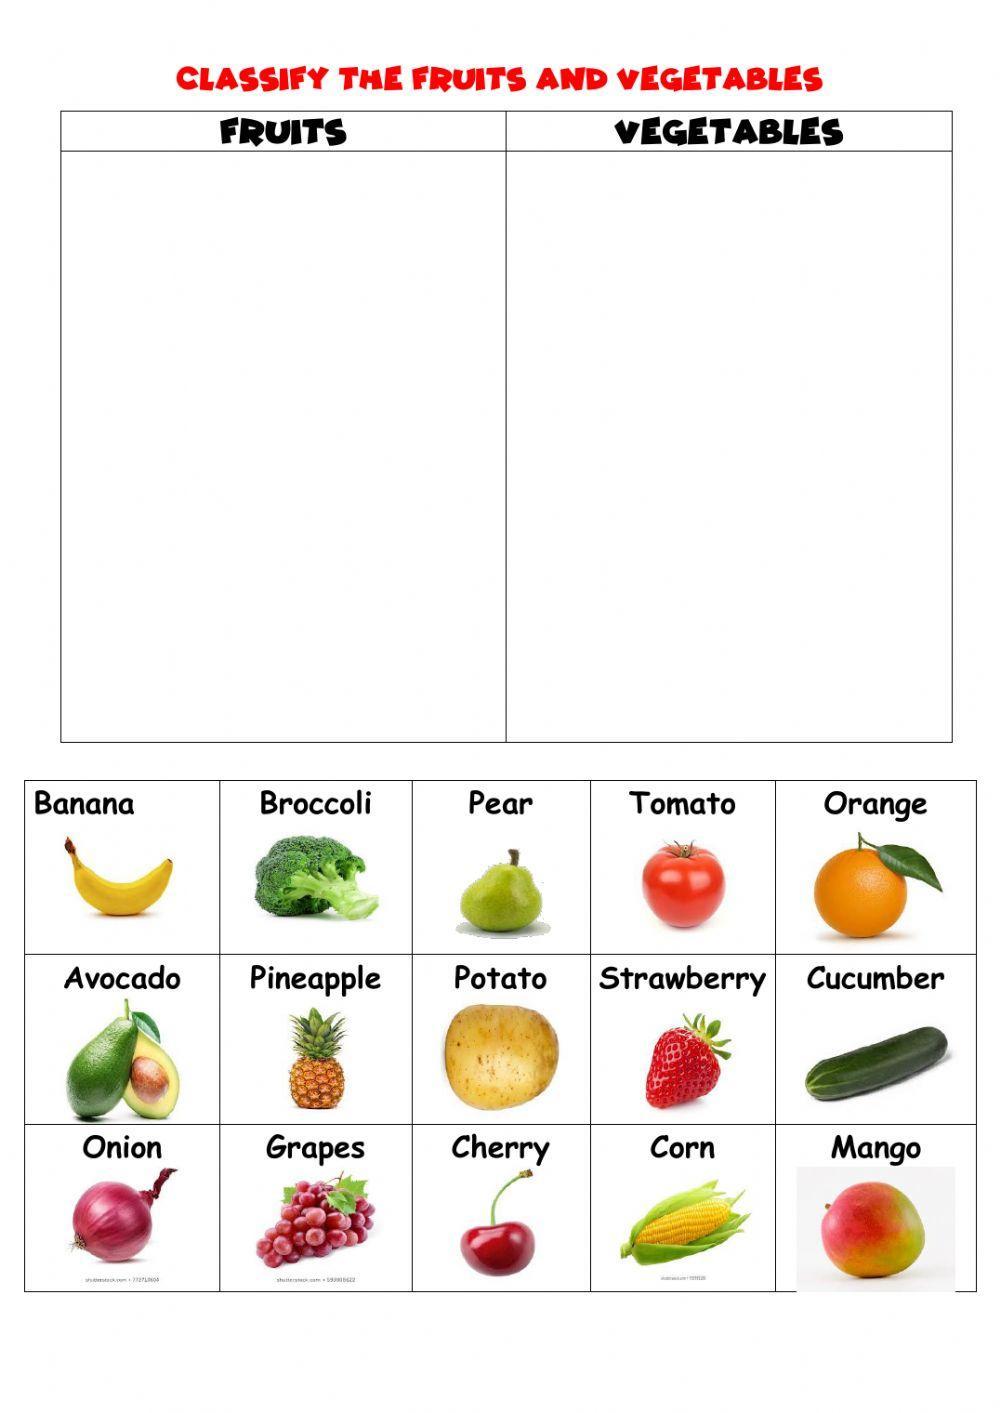 Fruits and vegetables classify